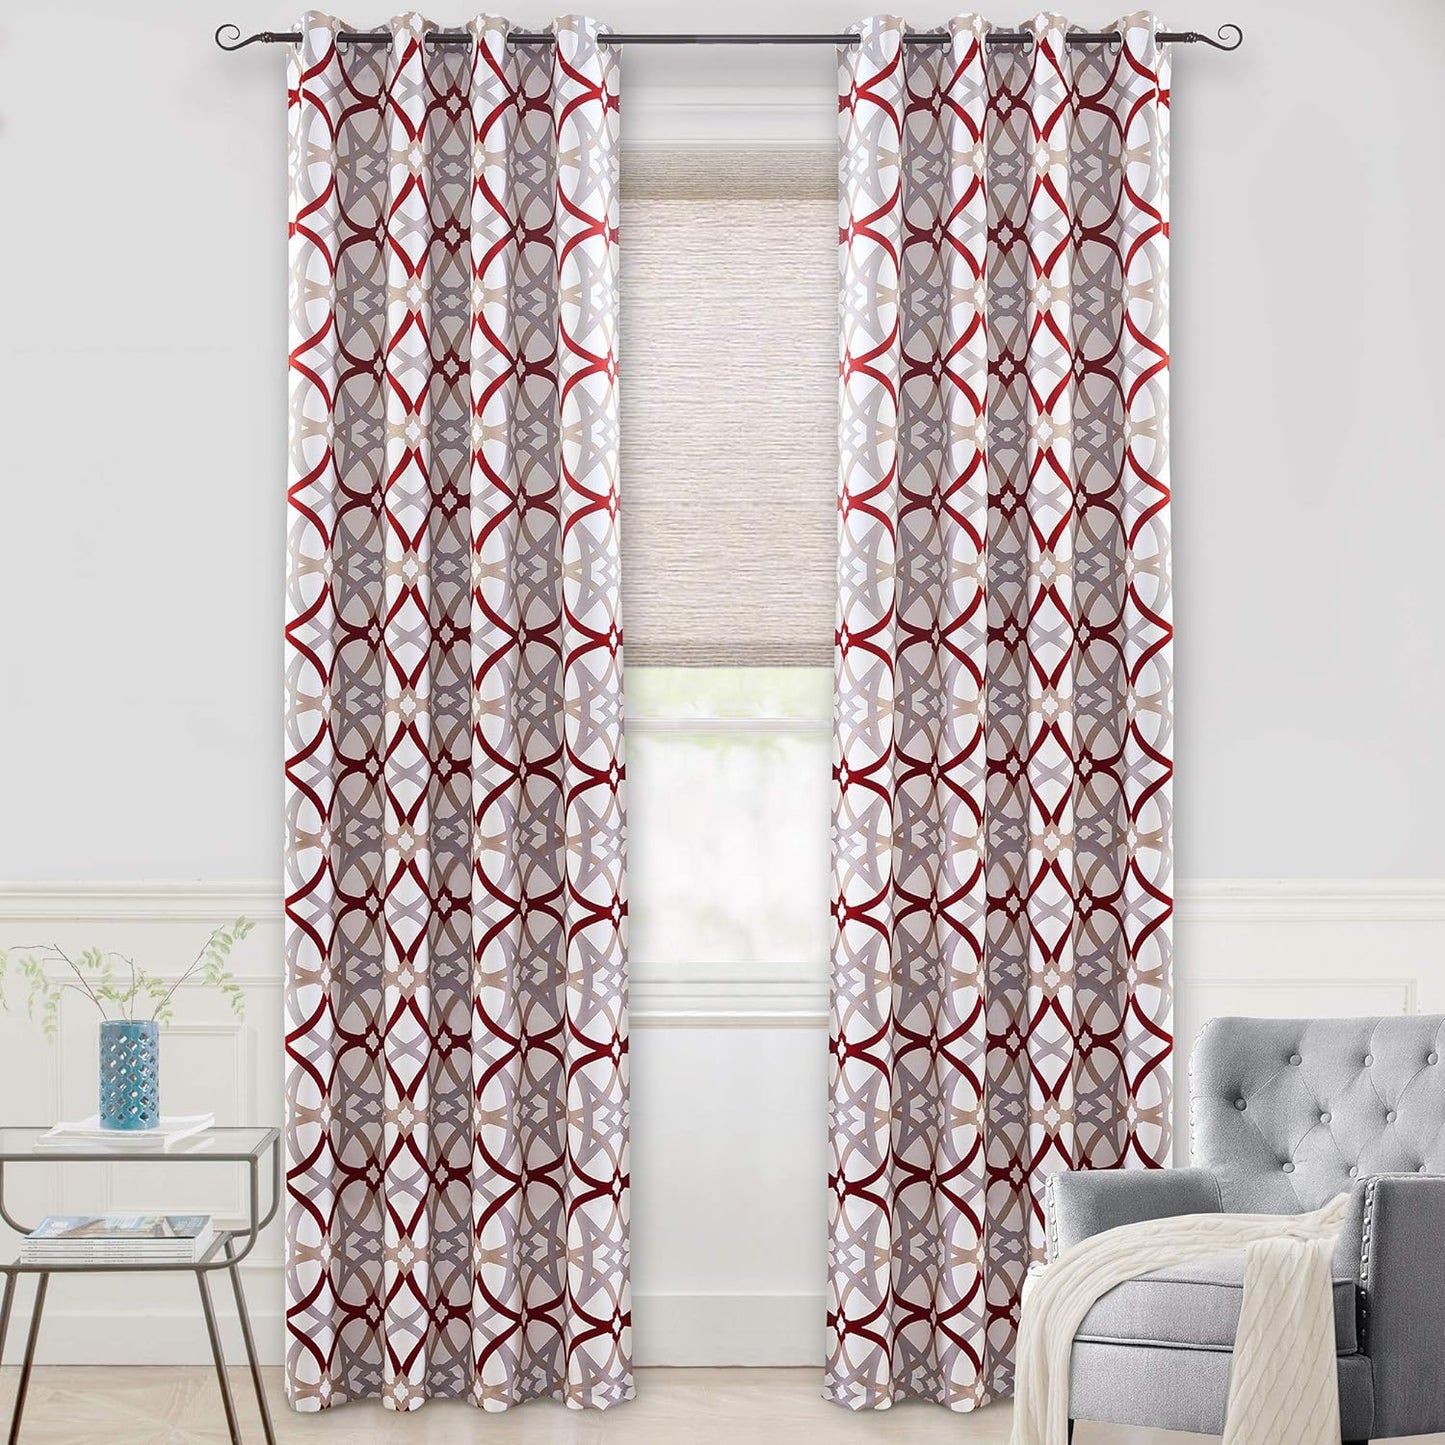 Driftaway Alexander Thermal Blackout Grommet Unlined Window Curtains Spiral Geo Trellis Pattern Set of 2 Panels Each Size 52 Inch by 84 Inch Red and Gray  DriftAway Red/Gray 52"X120" 